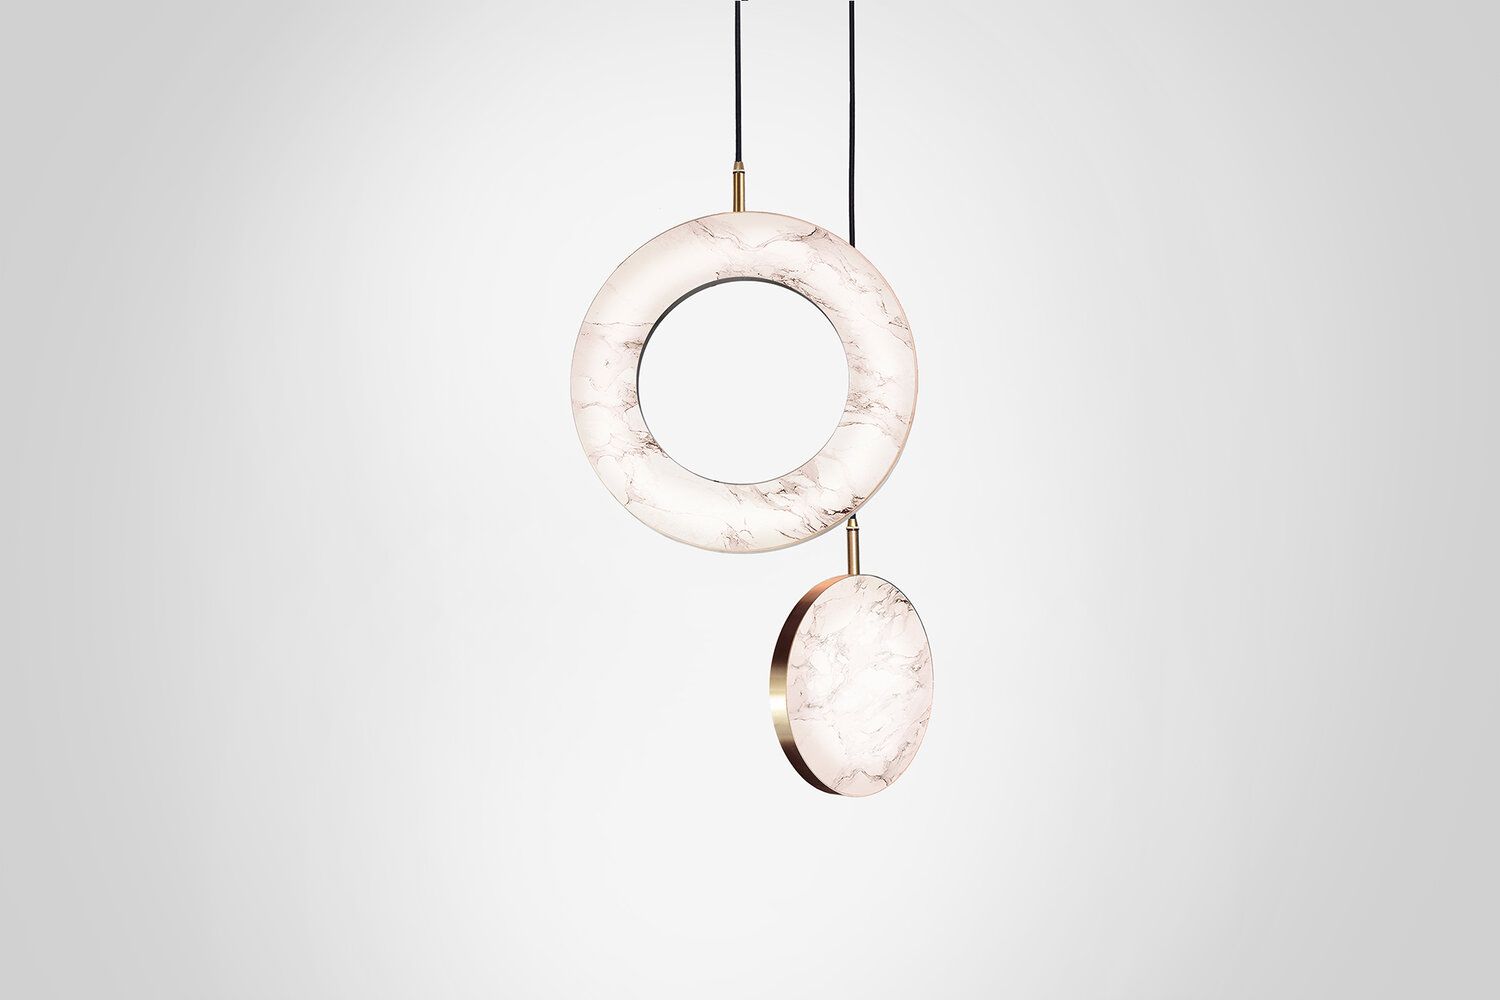 Pendant lamp ROSA RING by Marc Wood